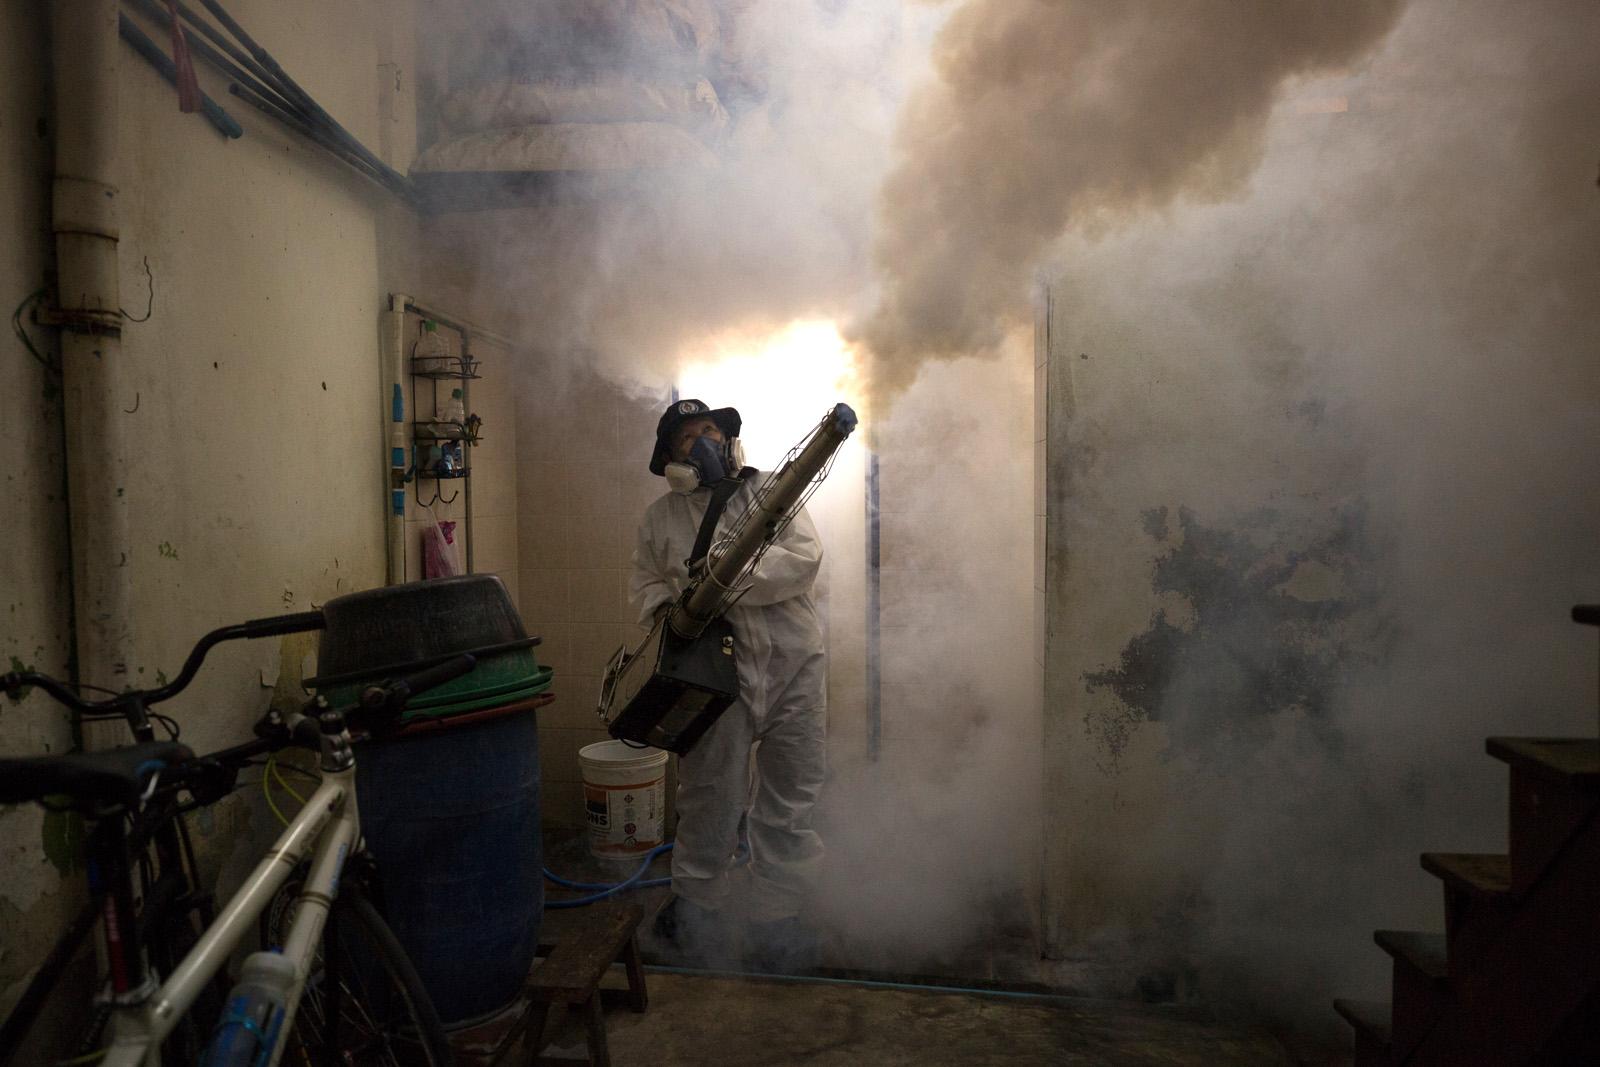 SOUTHEAST ASIA'S DENGUE EPIDEMIC - After a serious outbreak of dengue fever in the Chinatown...